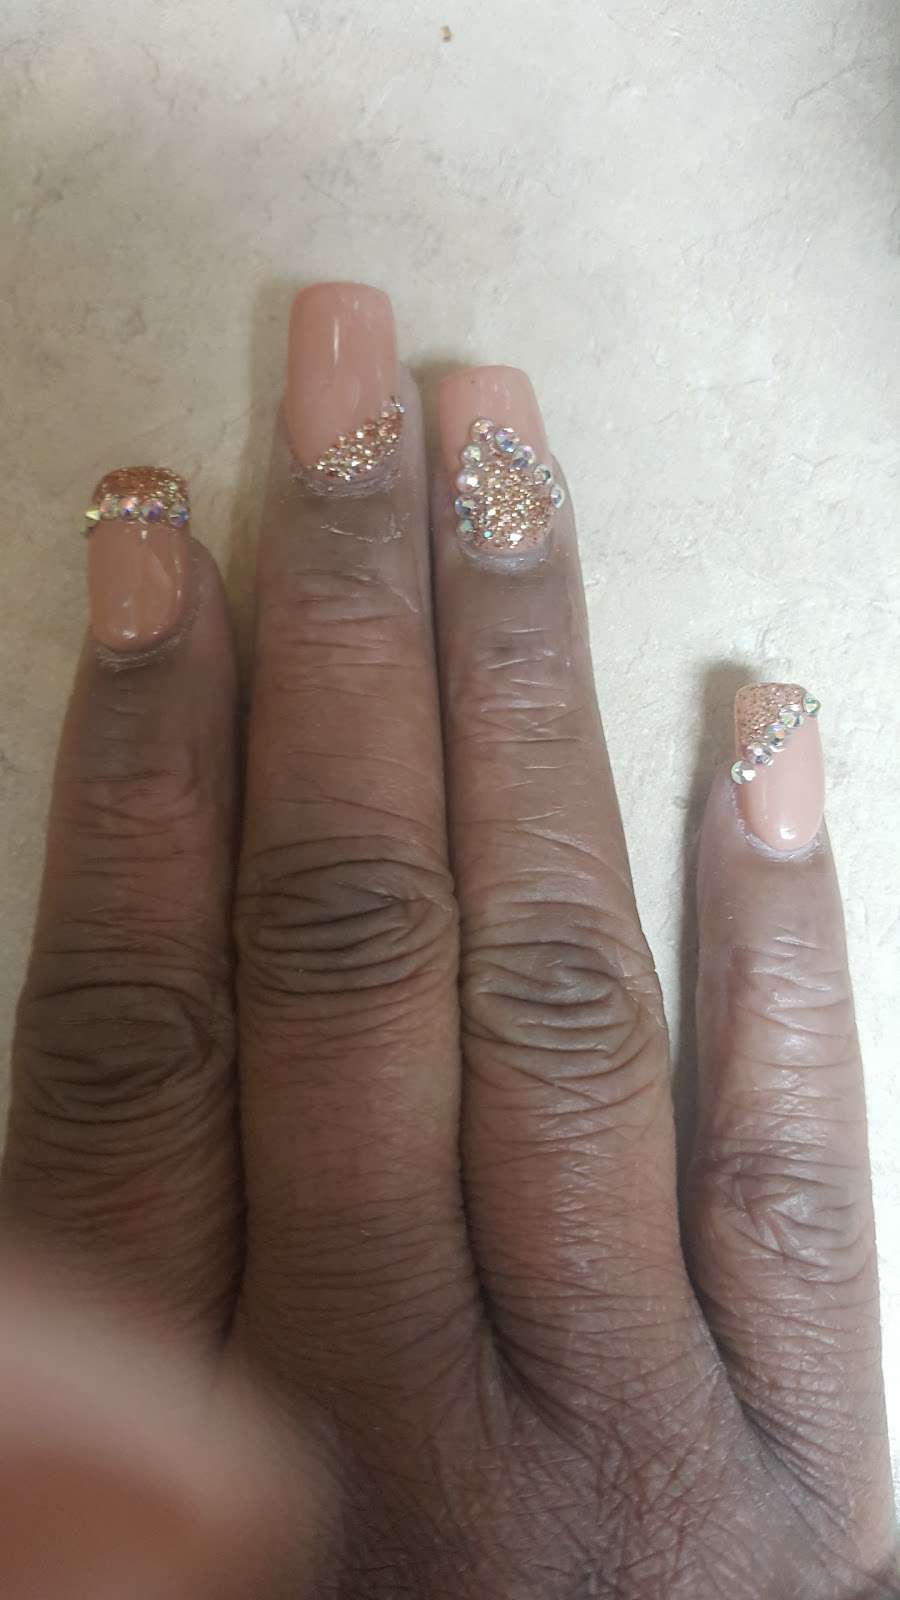 Lovely Nails | 5248 Marlboro Pike, Coral Hills, MD 20743 | Phone: (301) 420-7776